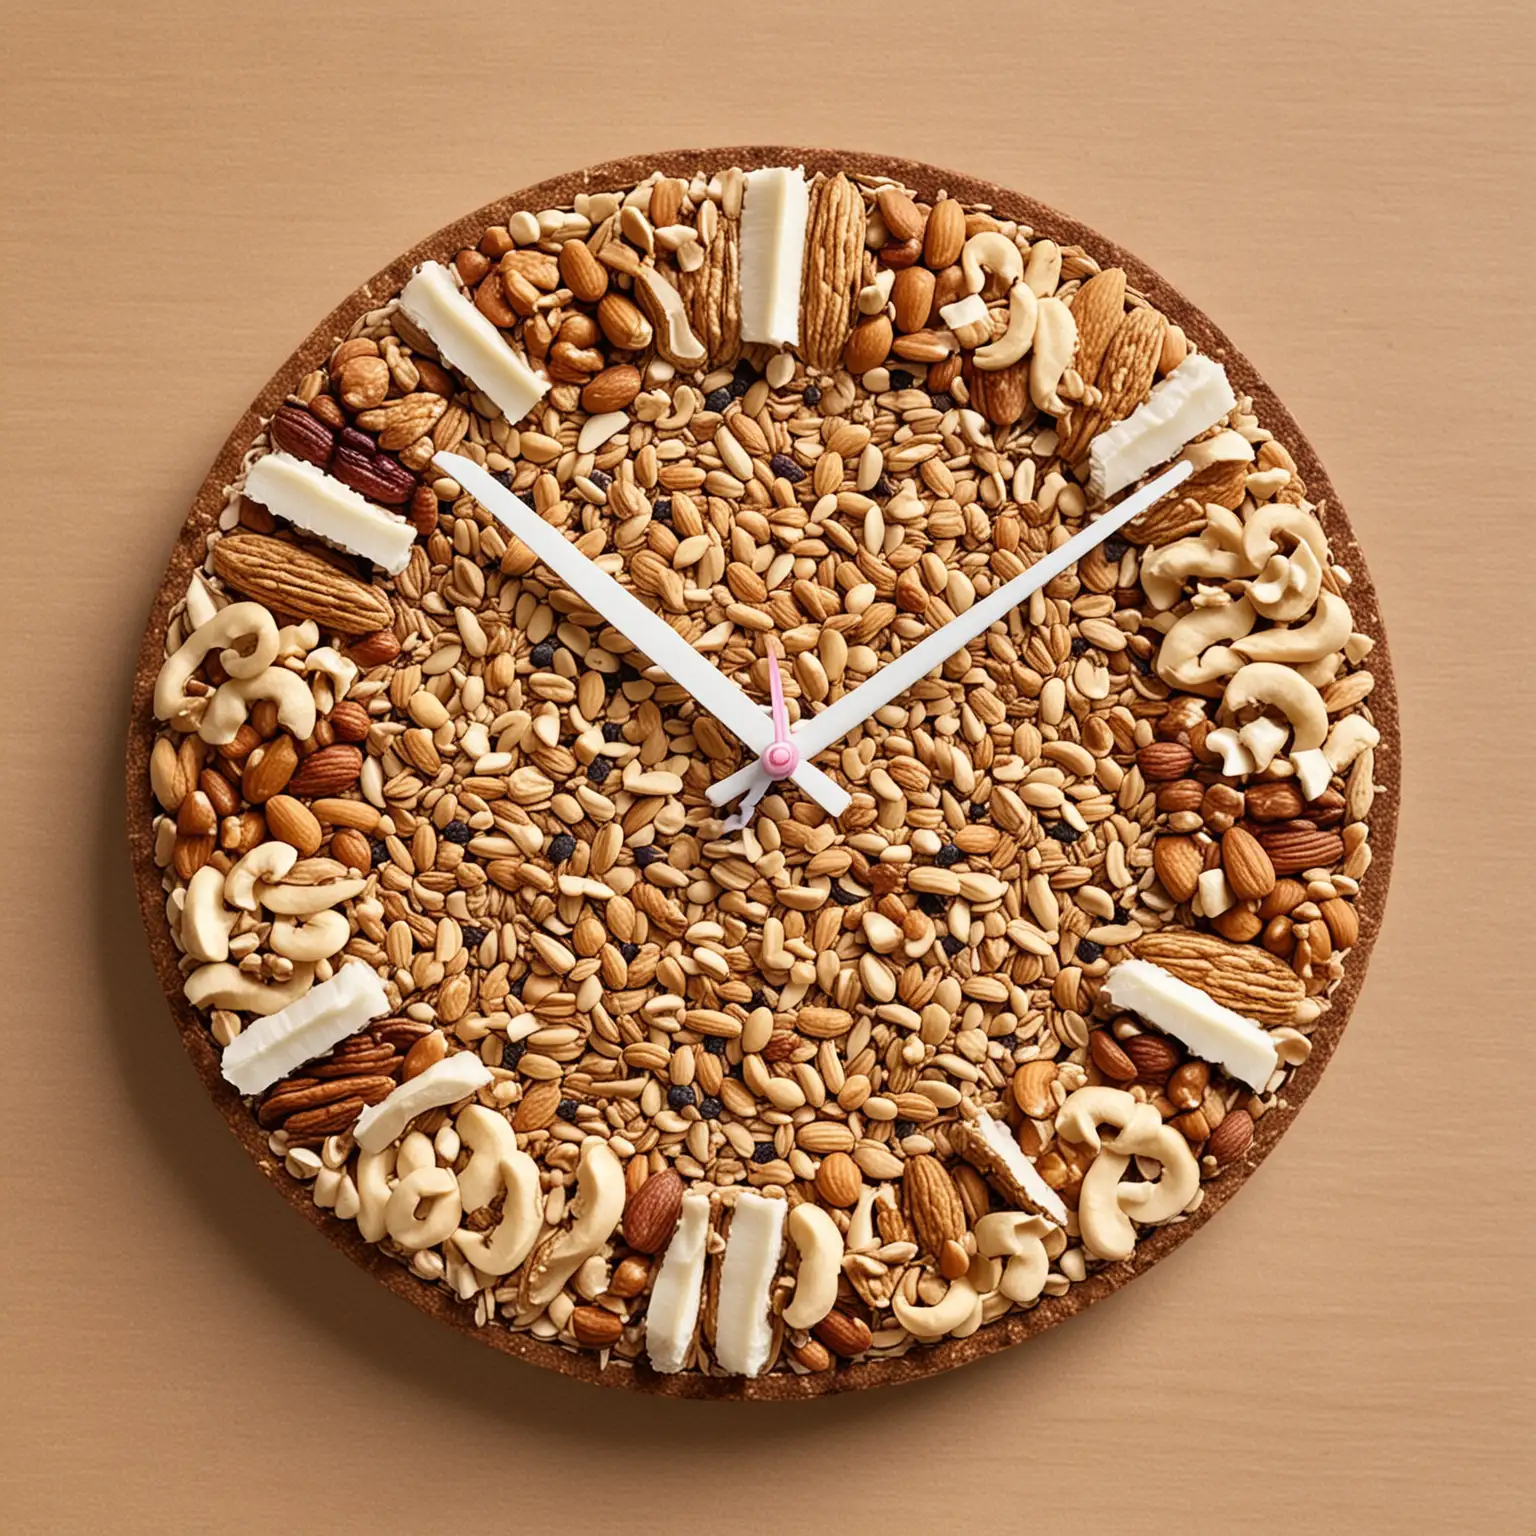 Nutty Snack Clock Healthy Timekeeping with Seeds Nuts and Granola